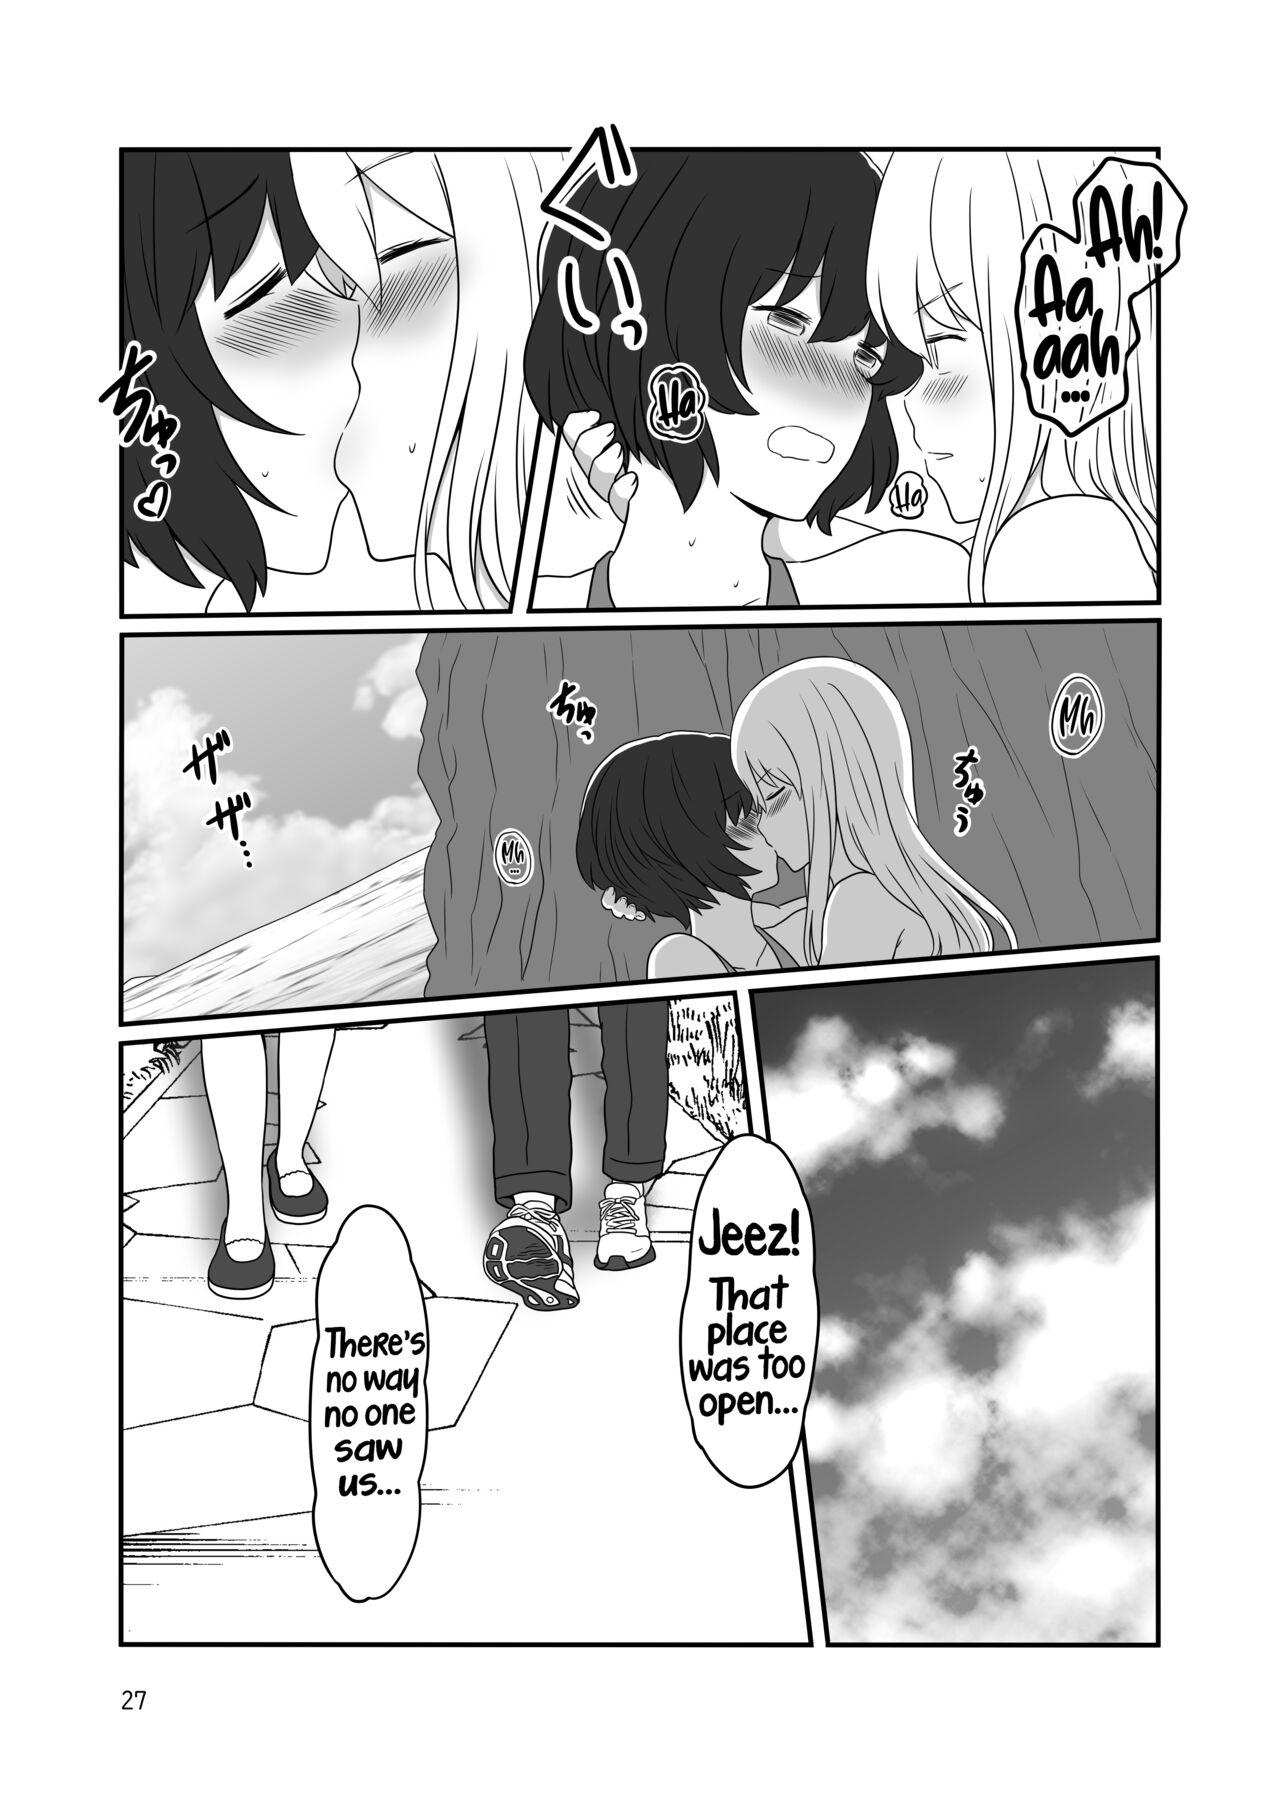 A yuri couple does exhibitionism at the beach 25